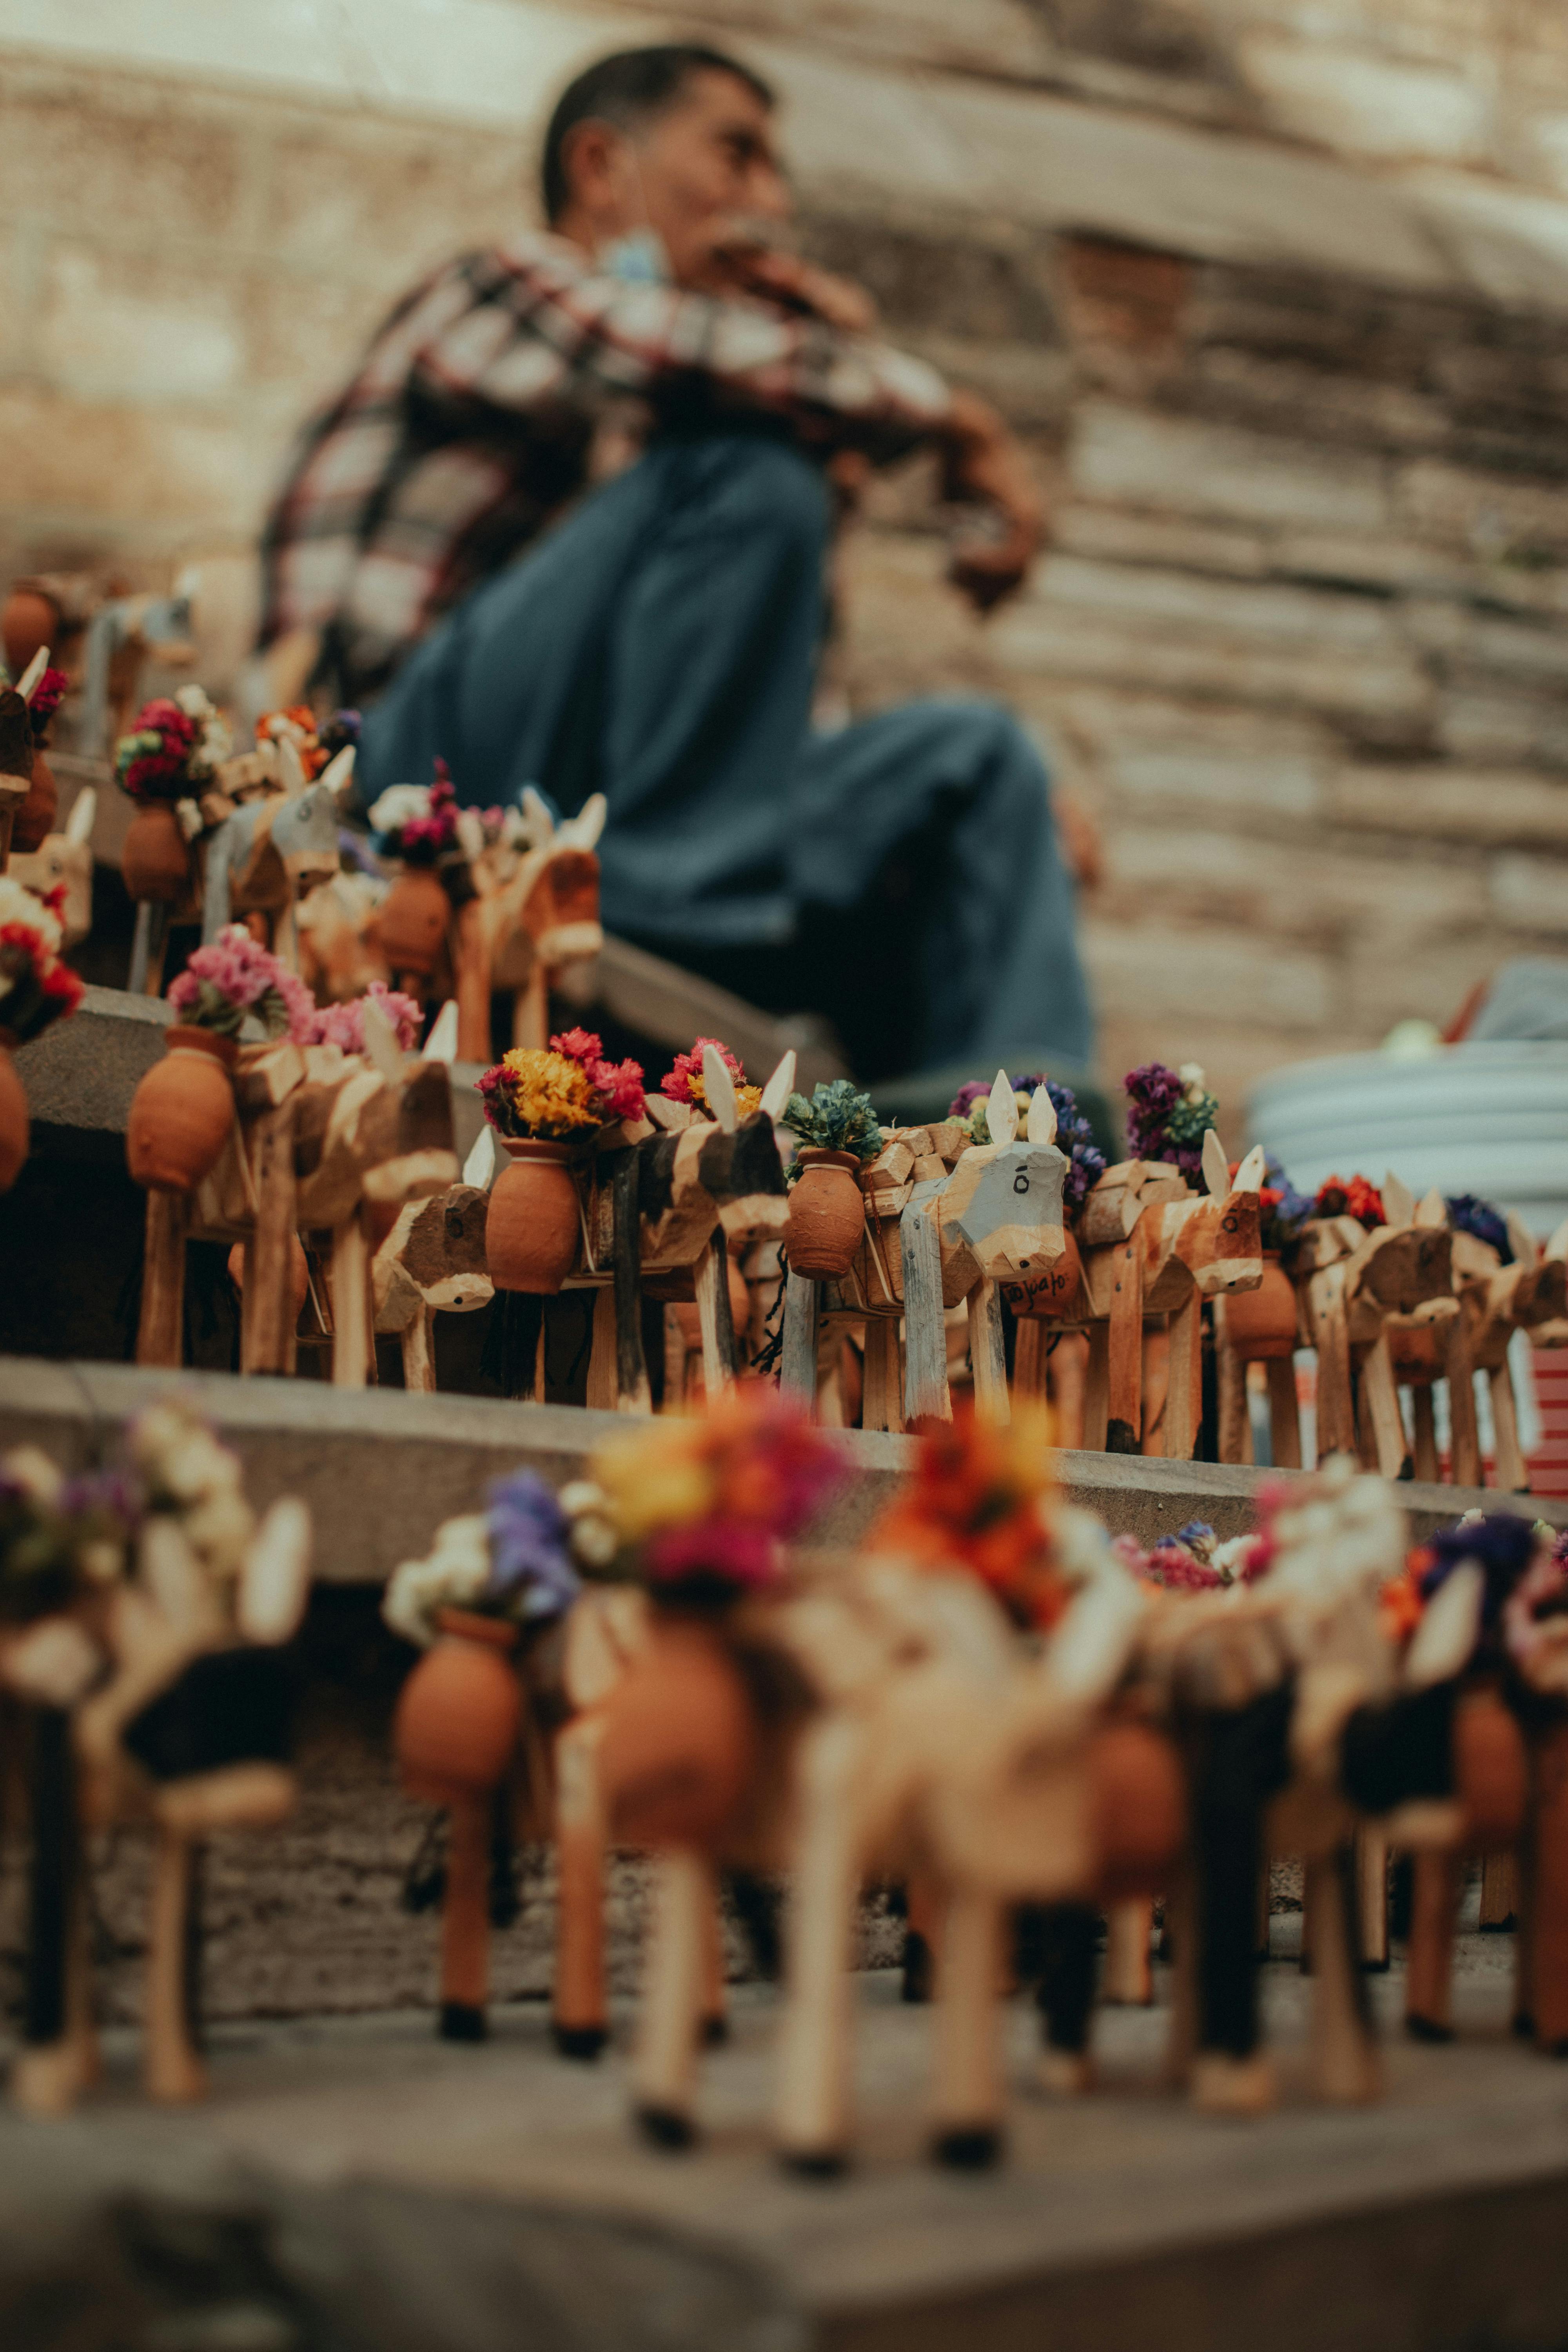 Two wooden dolls photo – Free Brown Image on Unsplash